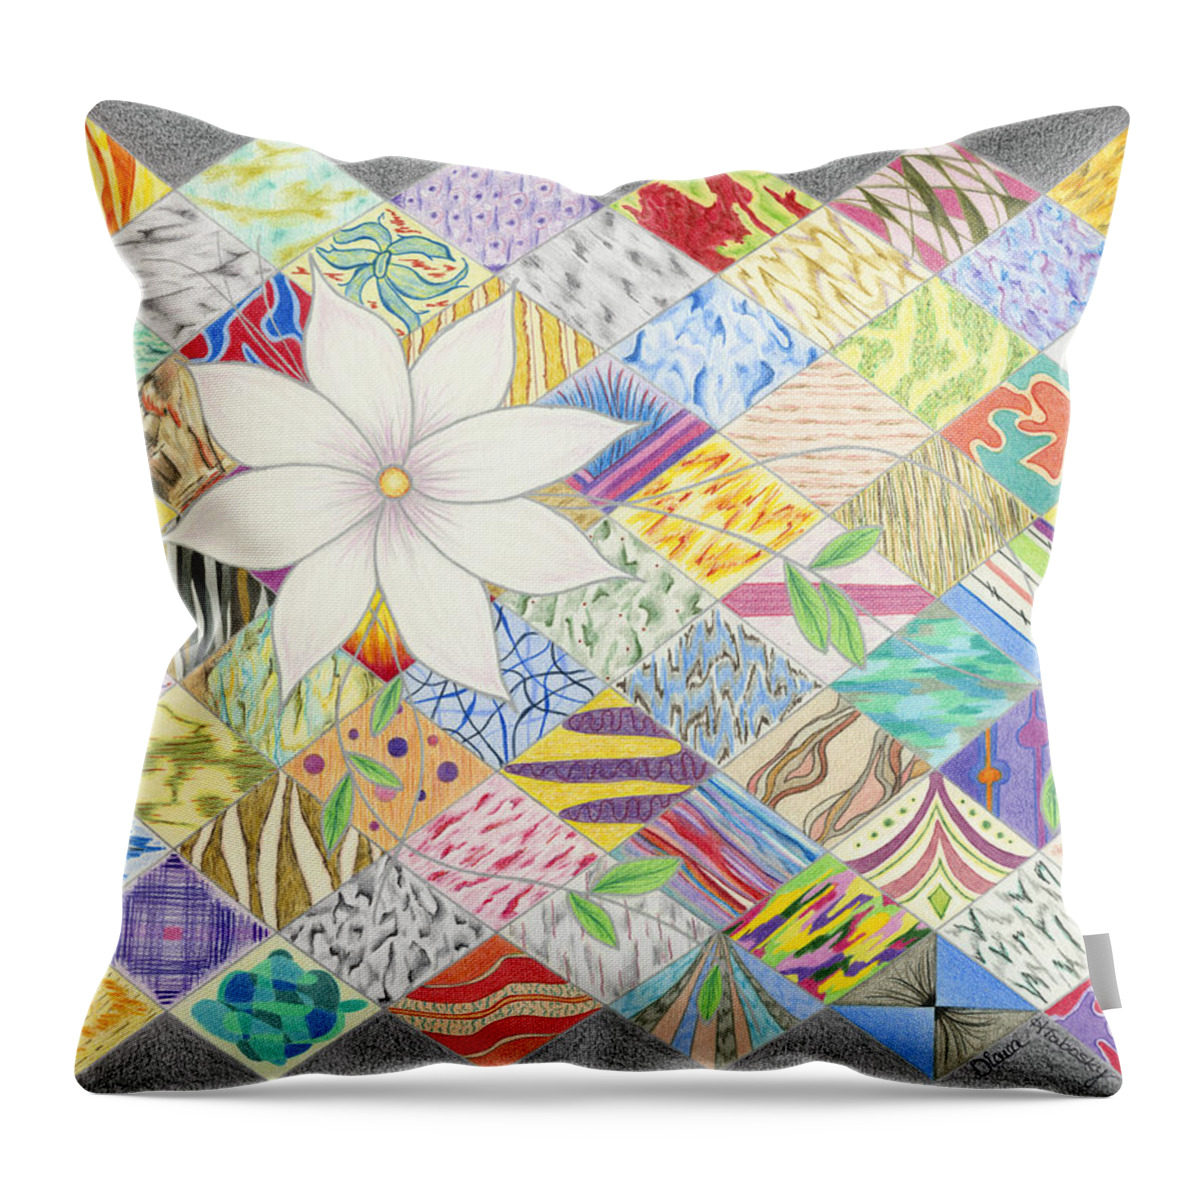 Colored Pencil Throw Pillow featuring the drawing Abstract Collection by Diana Hrabosky